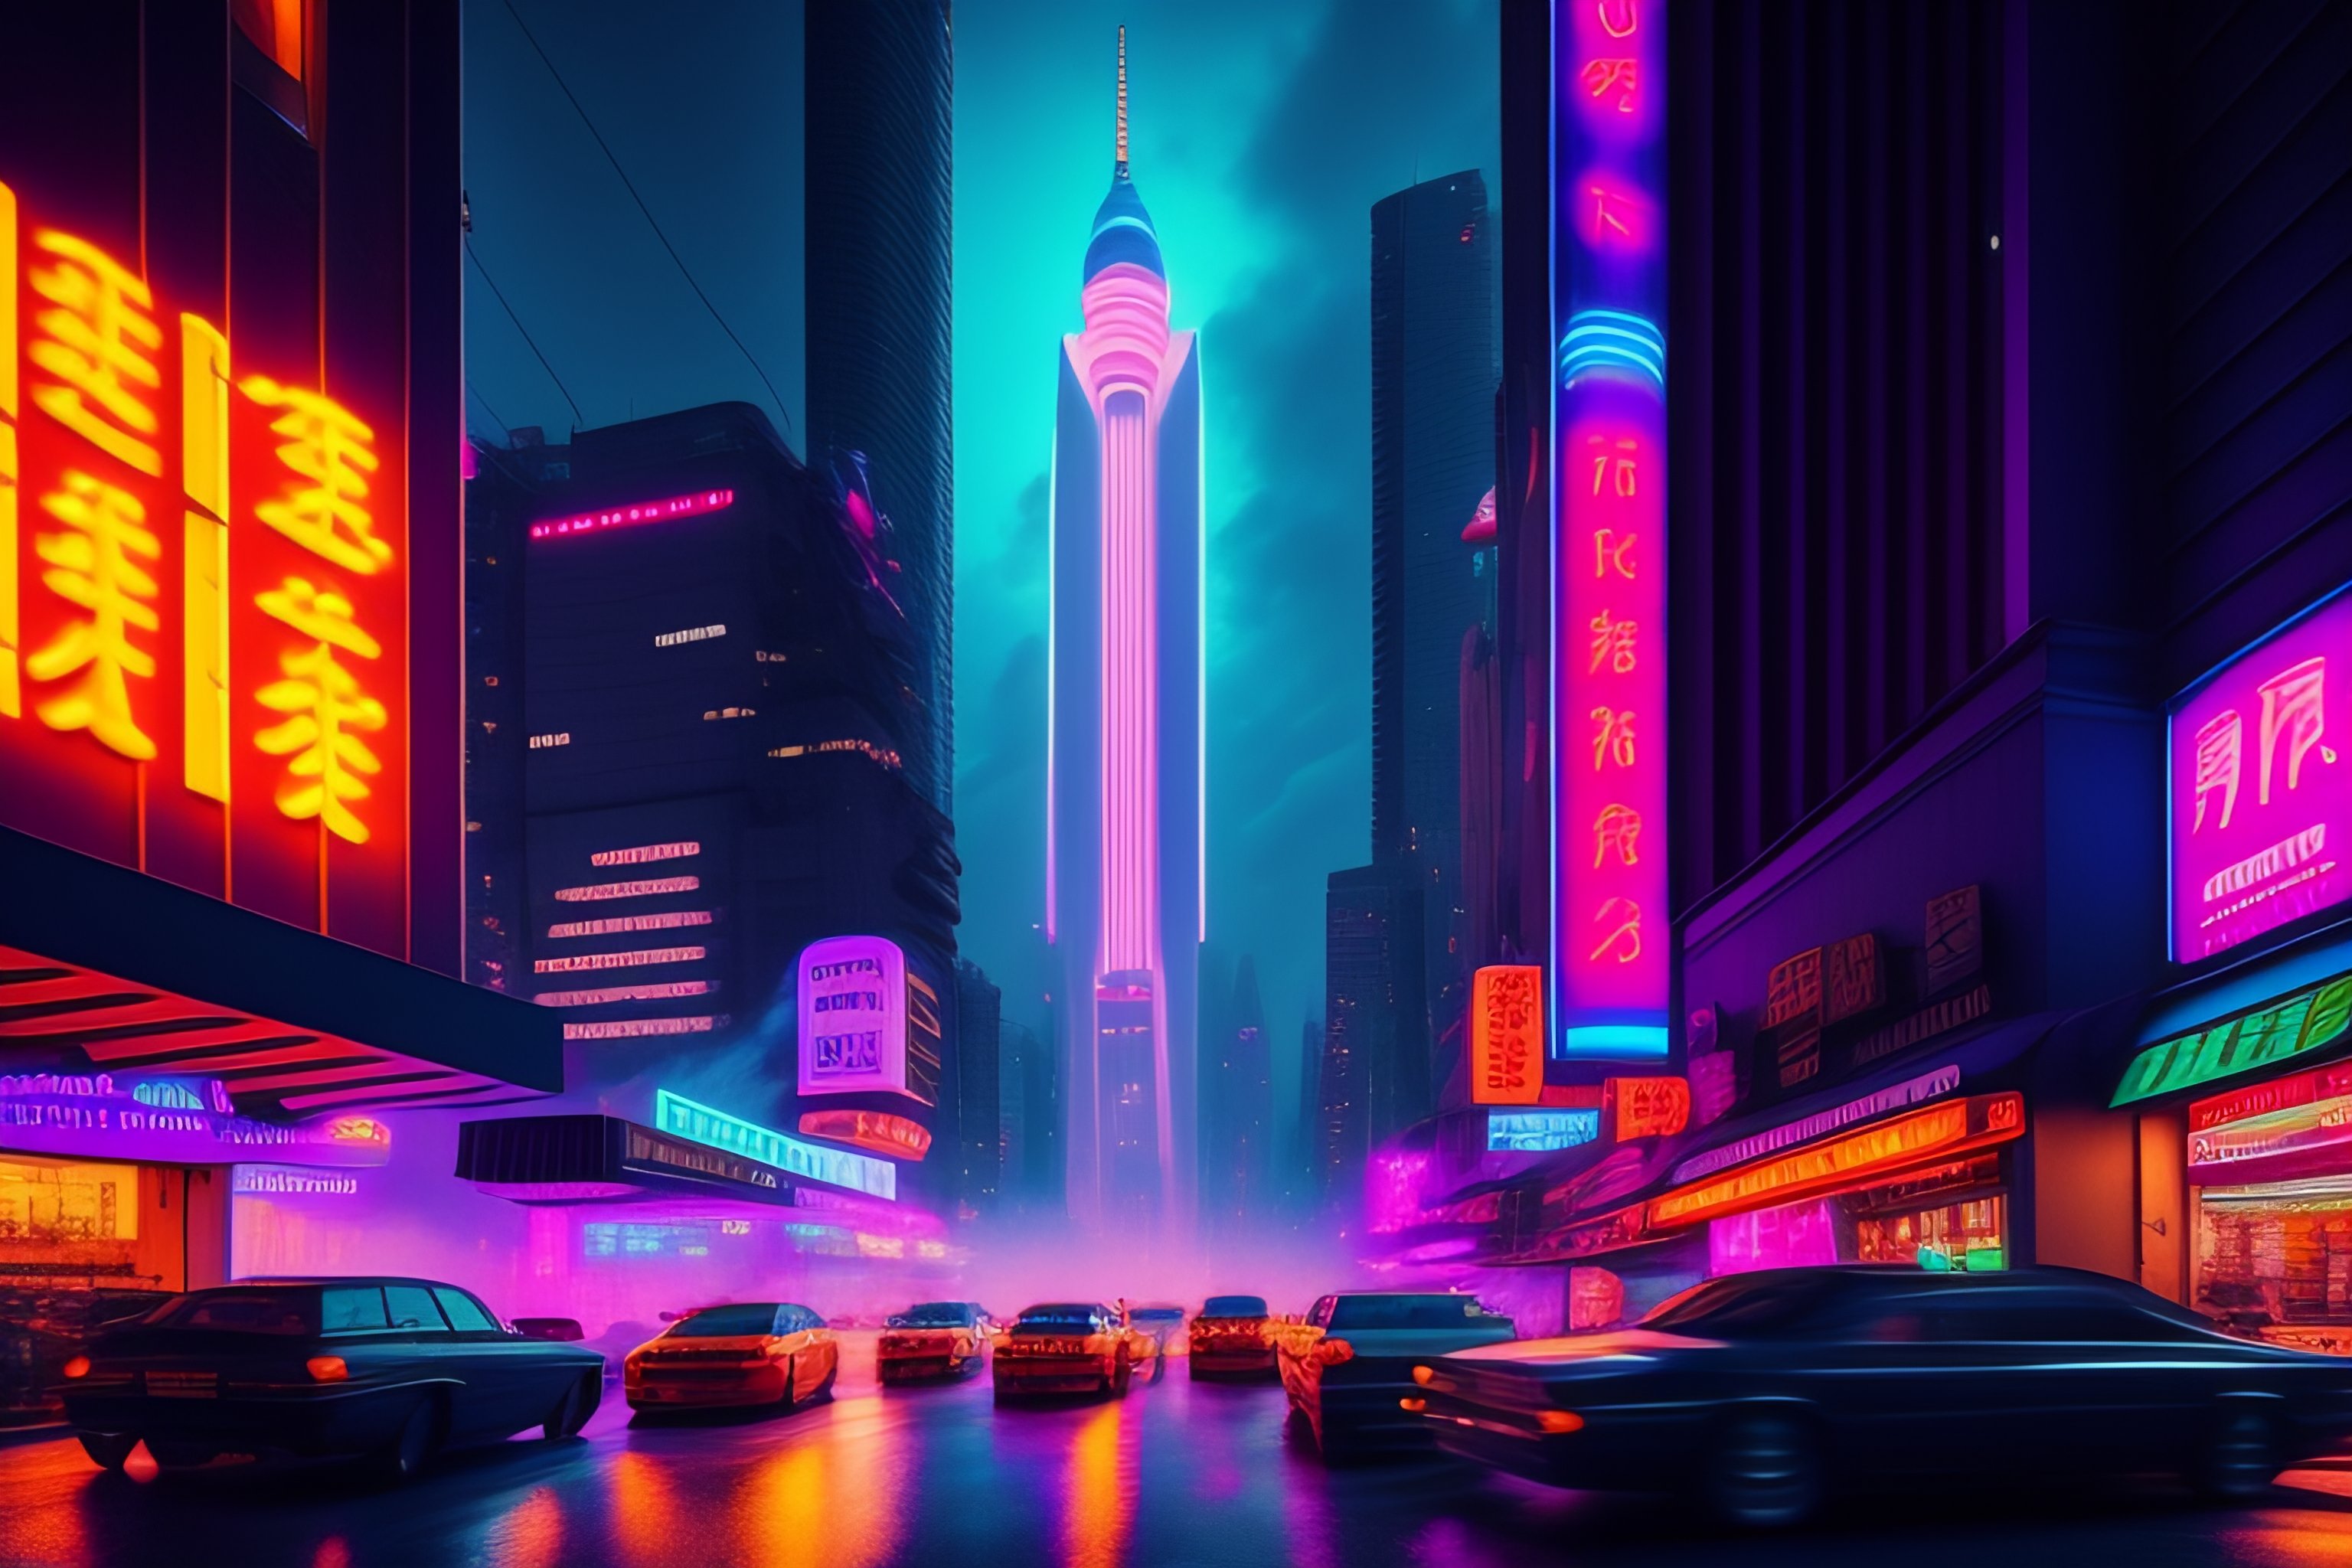 Lexica - A bustling metropolis with towering skyscrapers and neon 